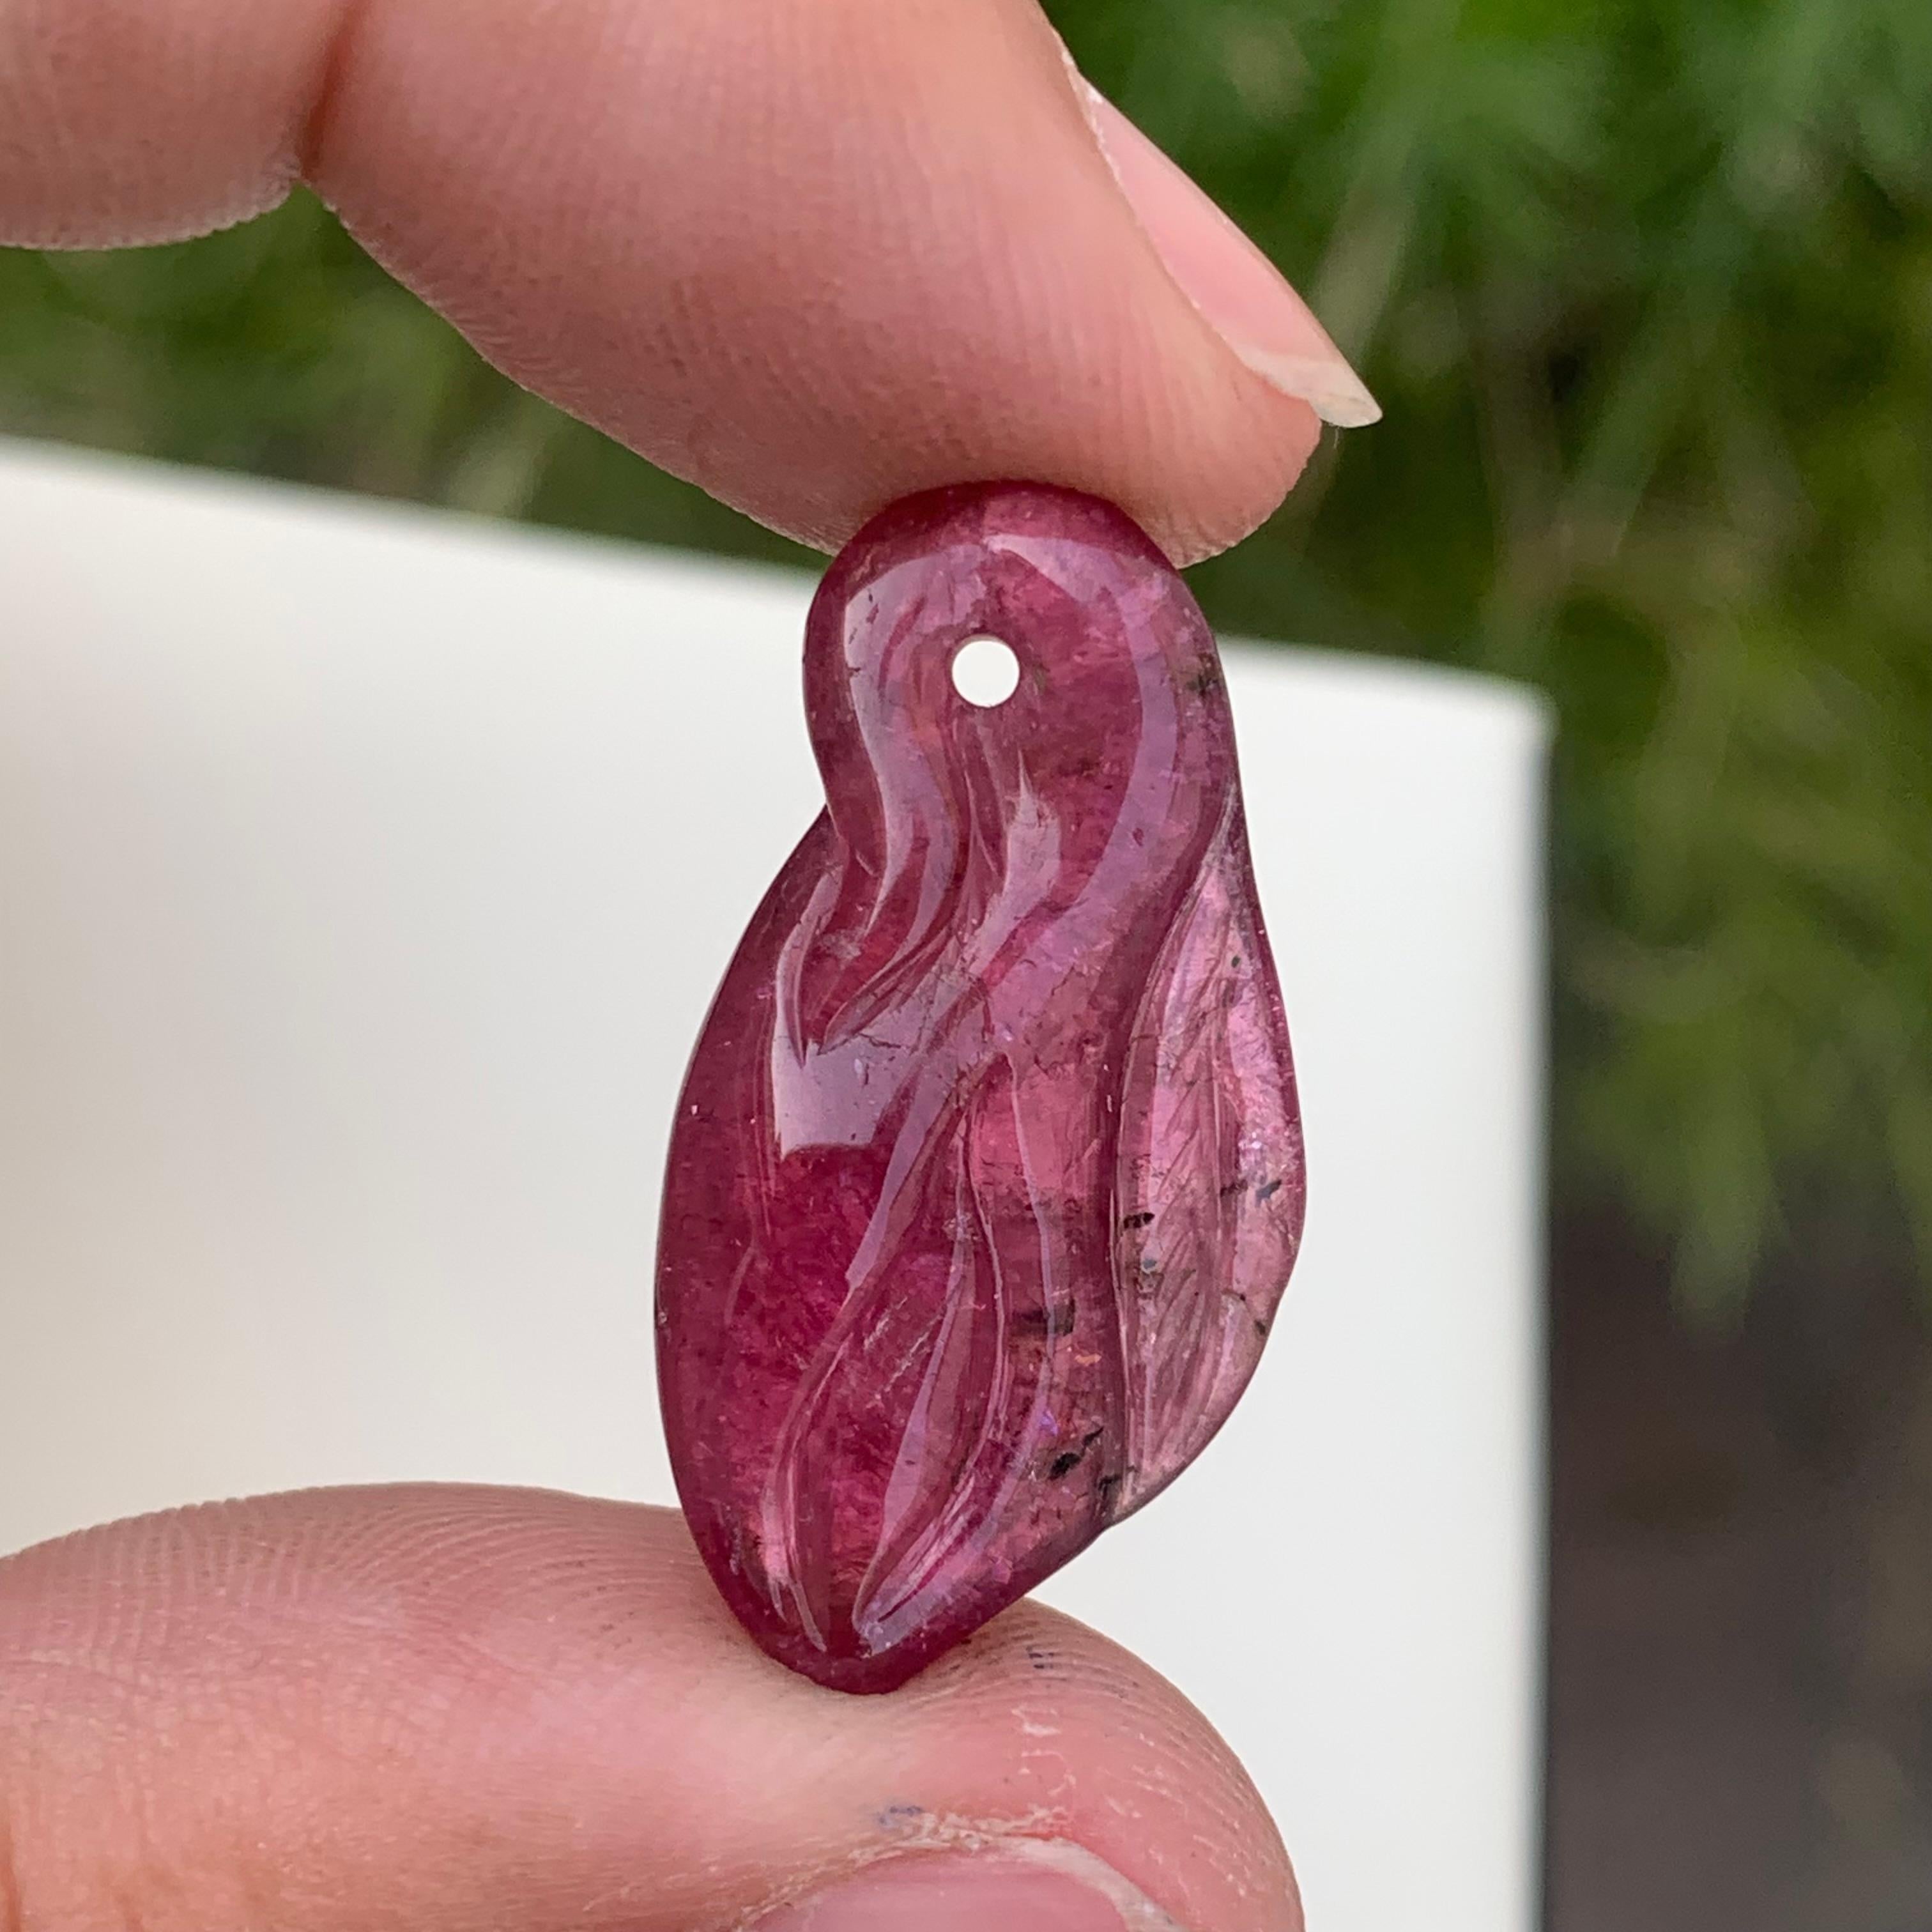 Glamorous Rubellite Tourmaline Drilled Craving From Africa 
Weight : 13.70 Carats
Dimensions : 2.8 x 1.4 x 0.5 Cm
Origin : Madagascar Africa
Clarity : SI
Color: Pink 
The rubellite is a transparent gemstone from the colorful family of the